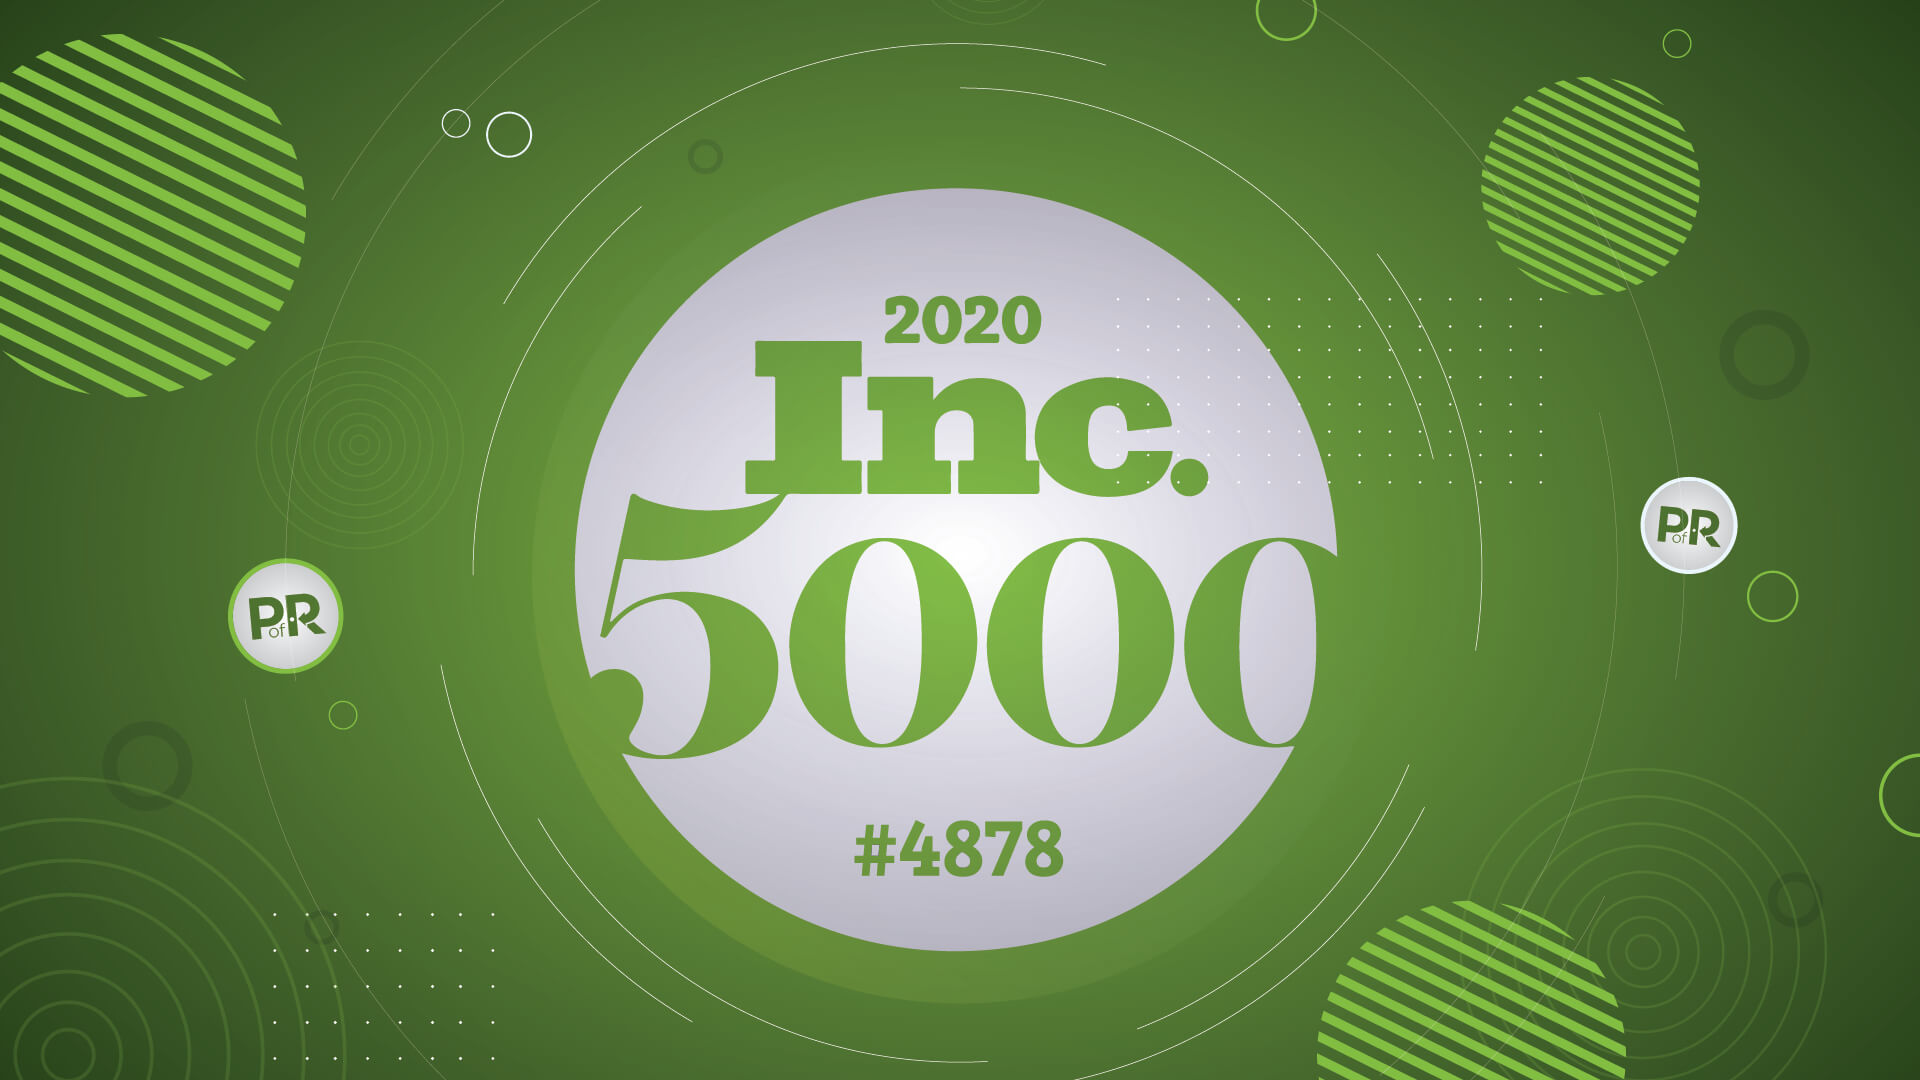 The 2020 Inc. 5000 list included Point of Rental at #4878.